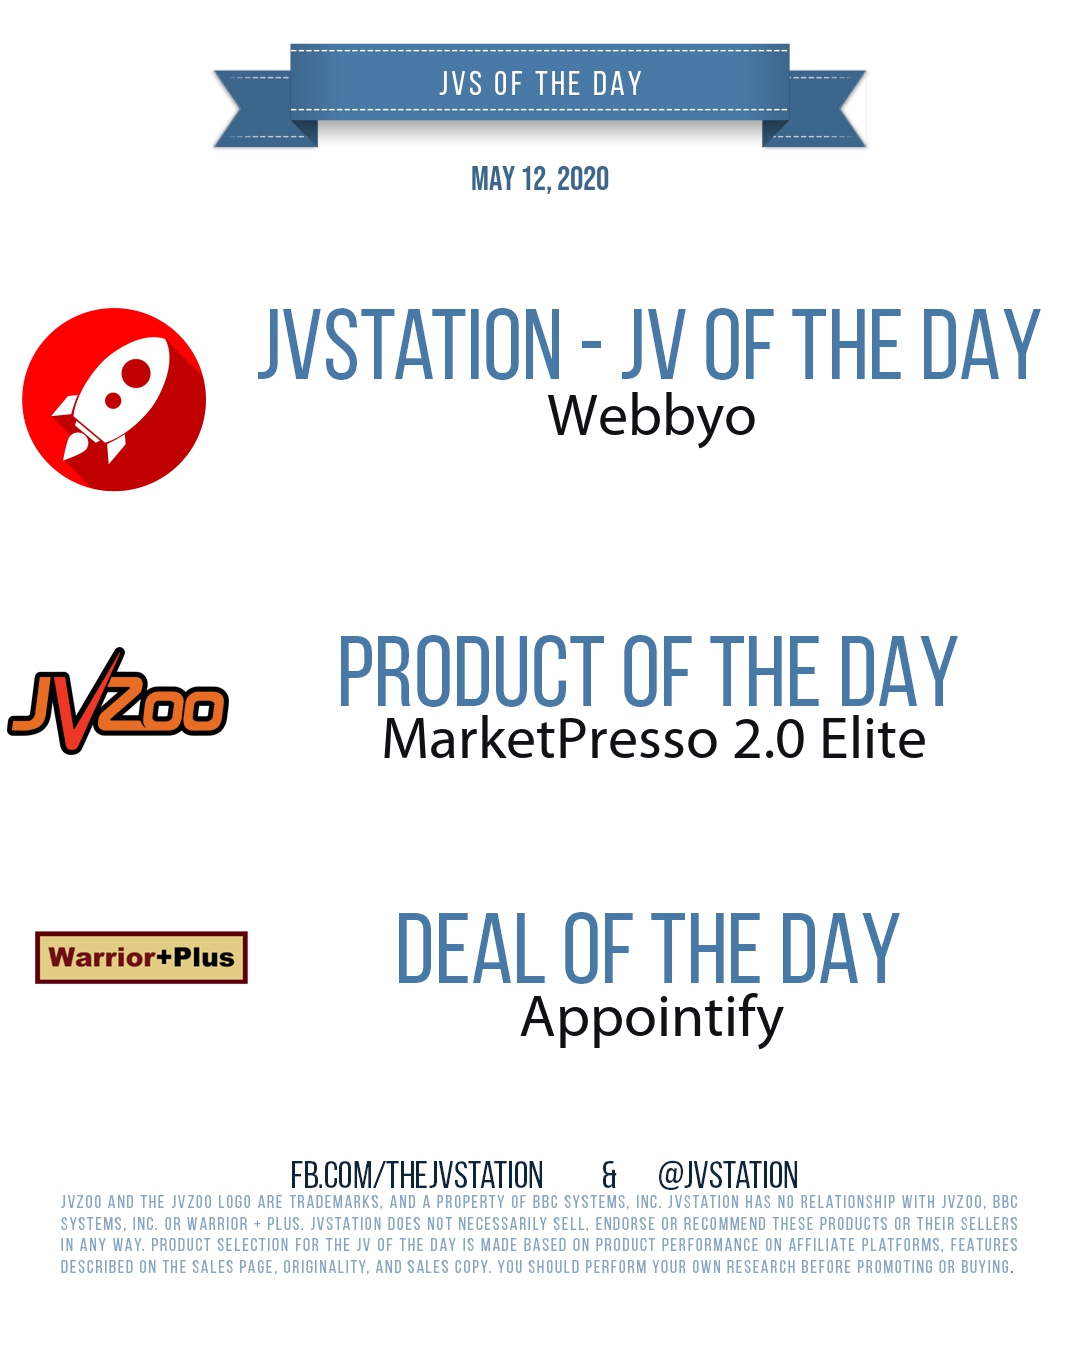 JVs of the day - May 12, 2020